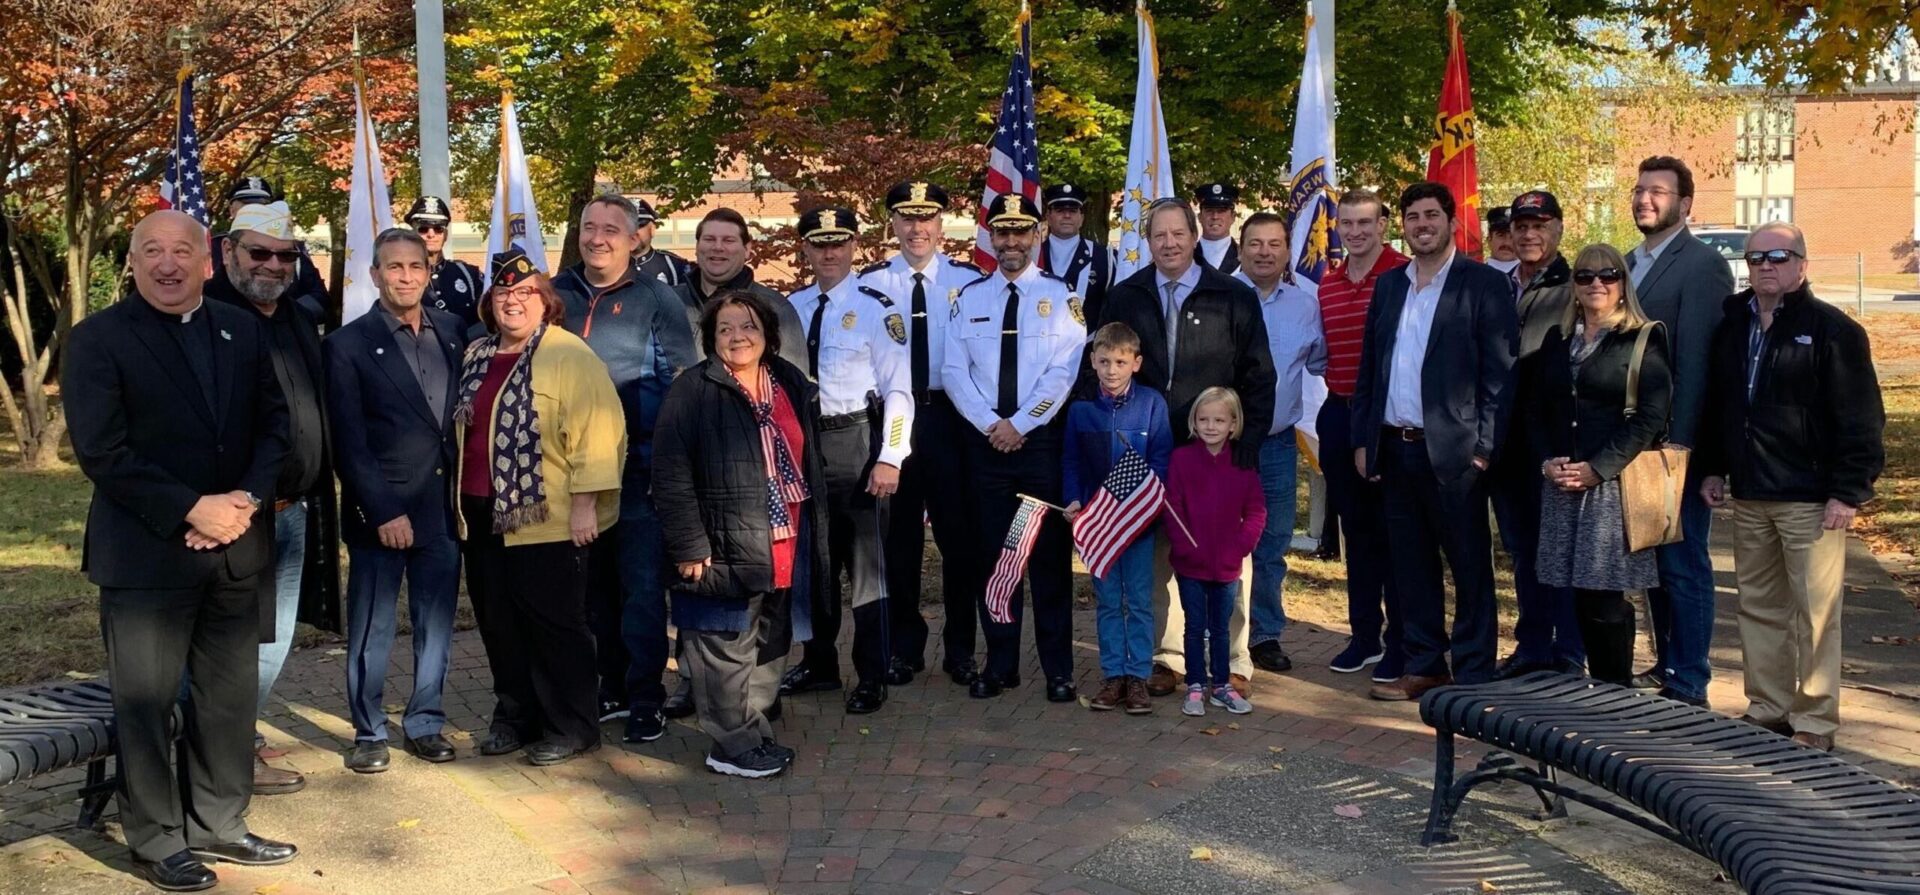 [CREDIT: Kim Wineman] Warwick and state officials gathered Nov. 11 at Warwick Veterans Memorial Park to observe Veterans Day.